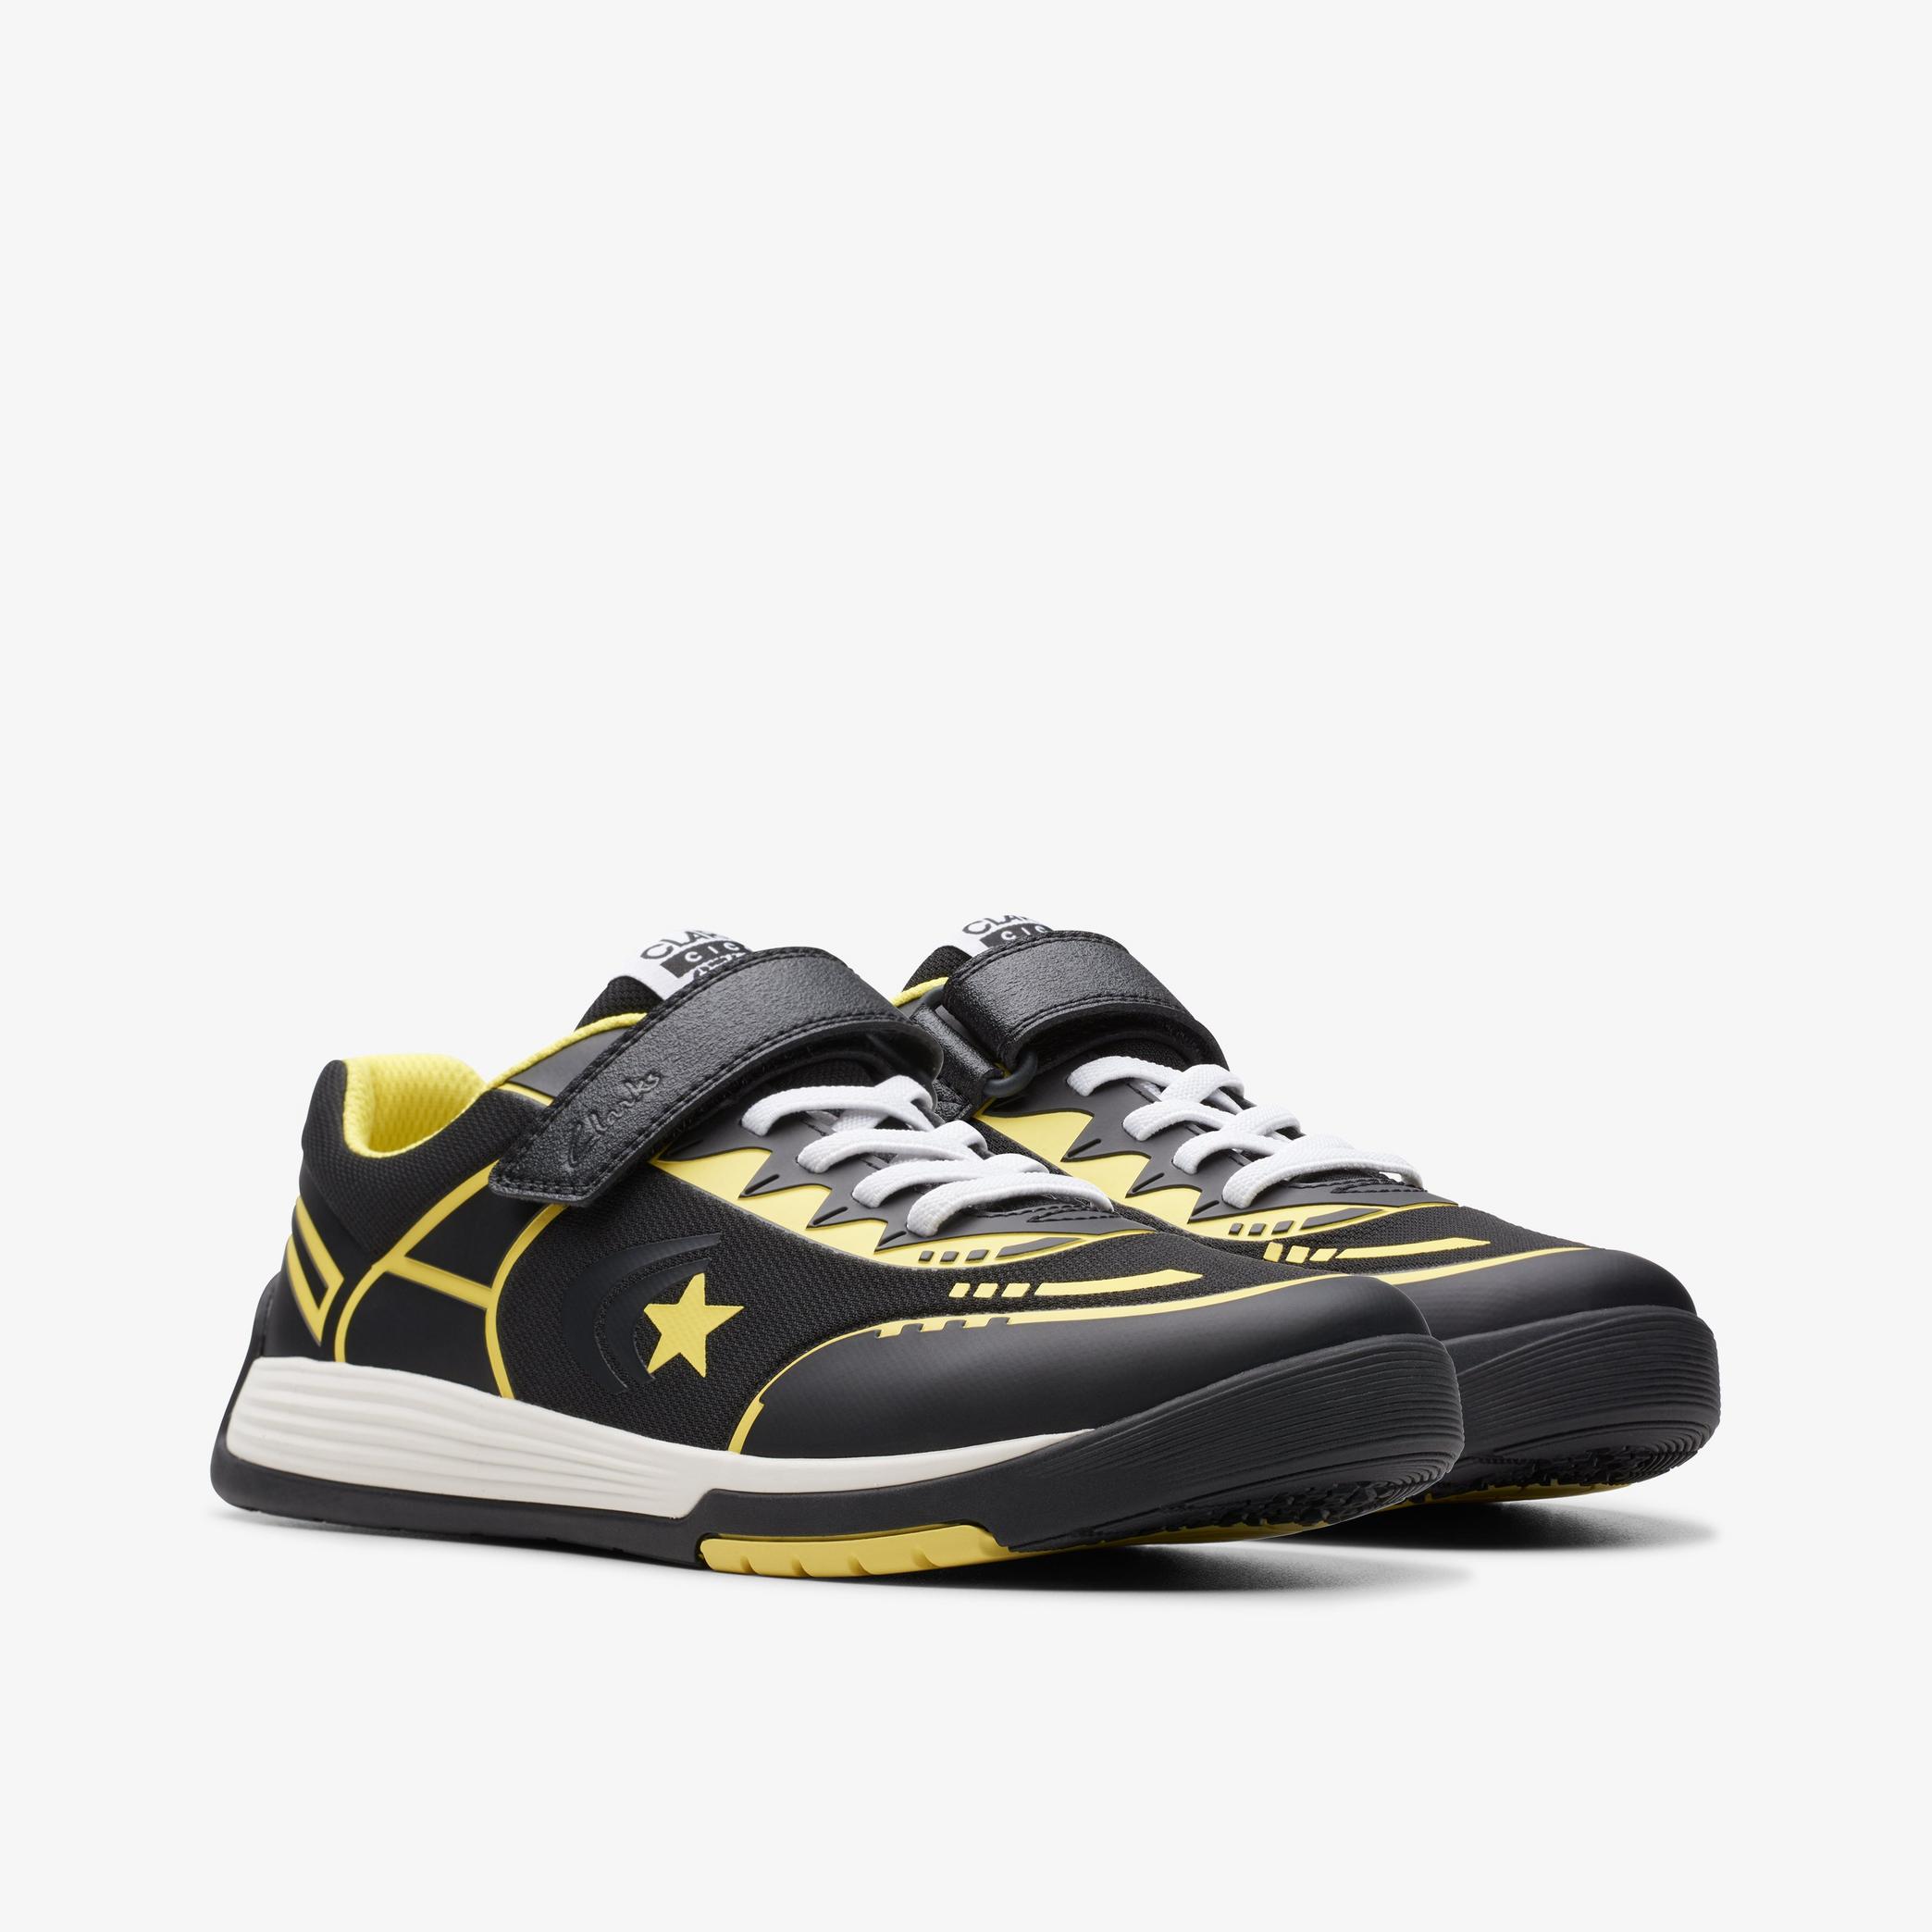 CICA Star Flex Youth Black Combination Trainers, view 4 of 7